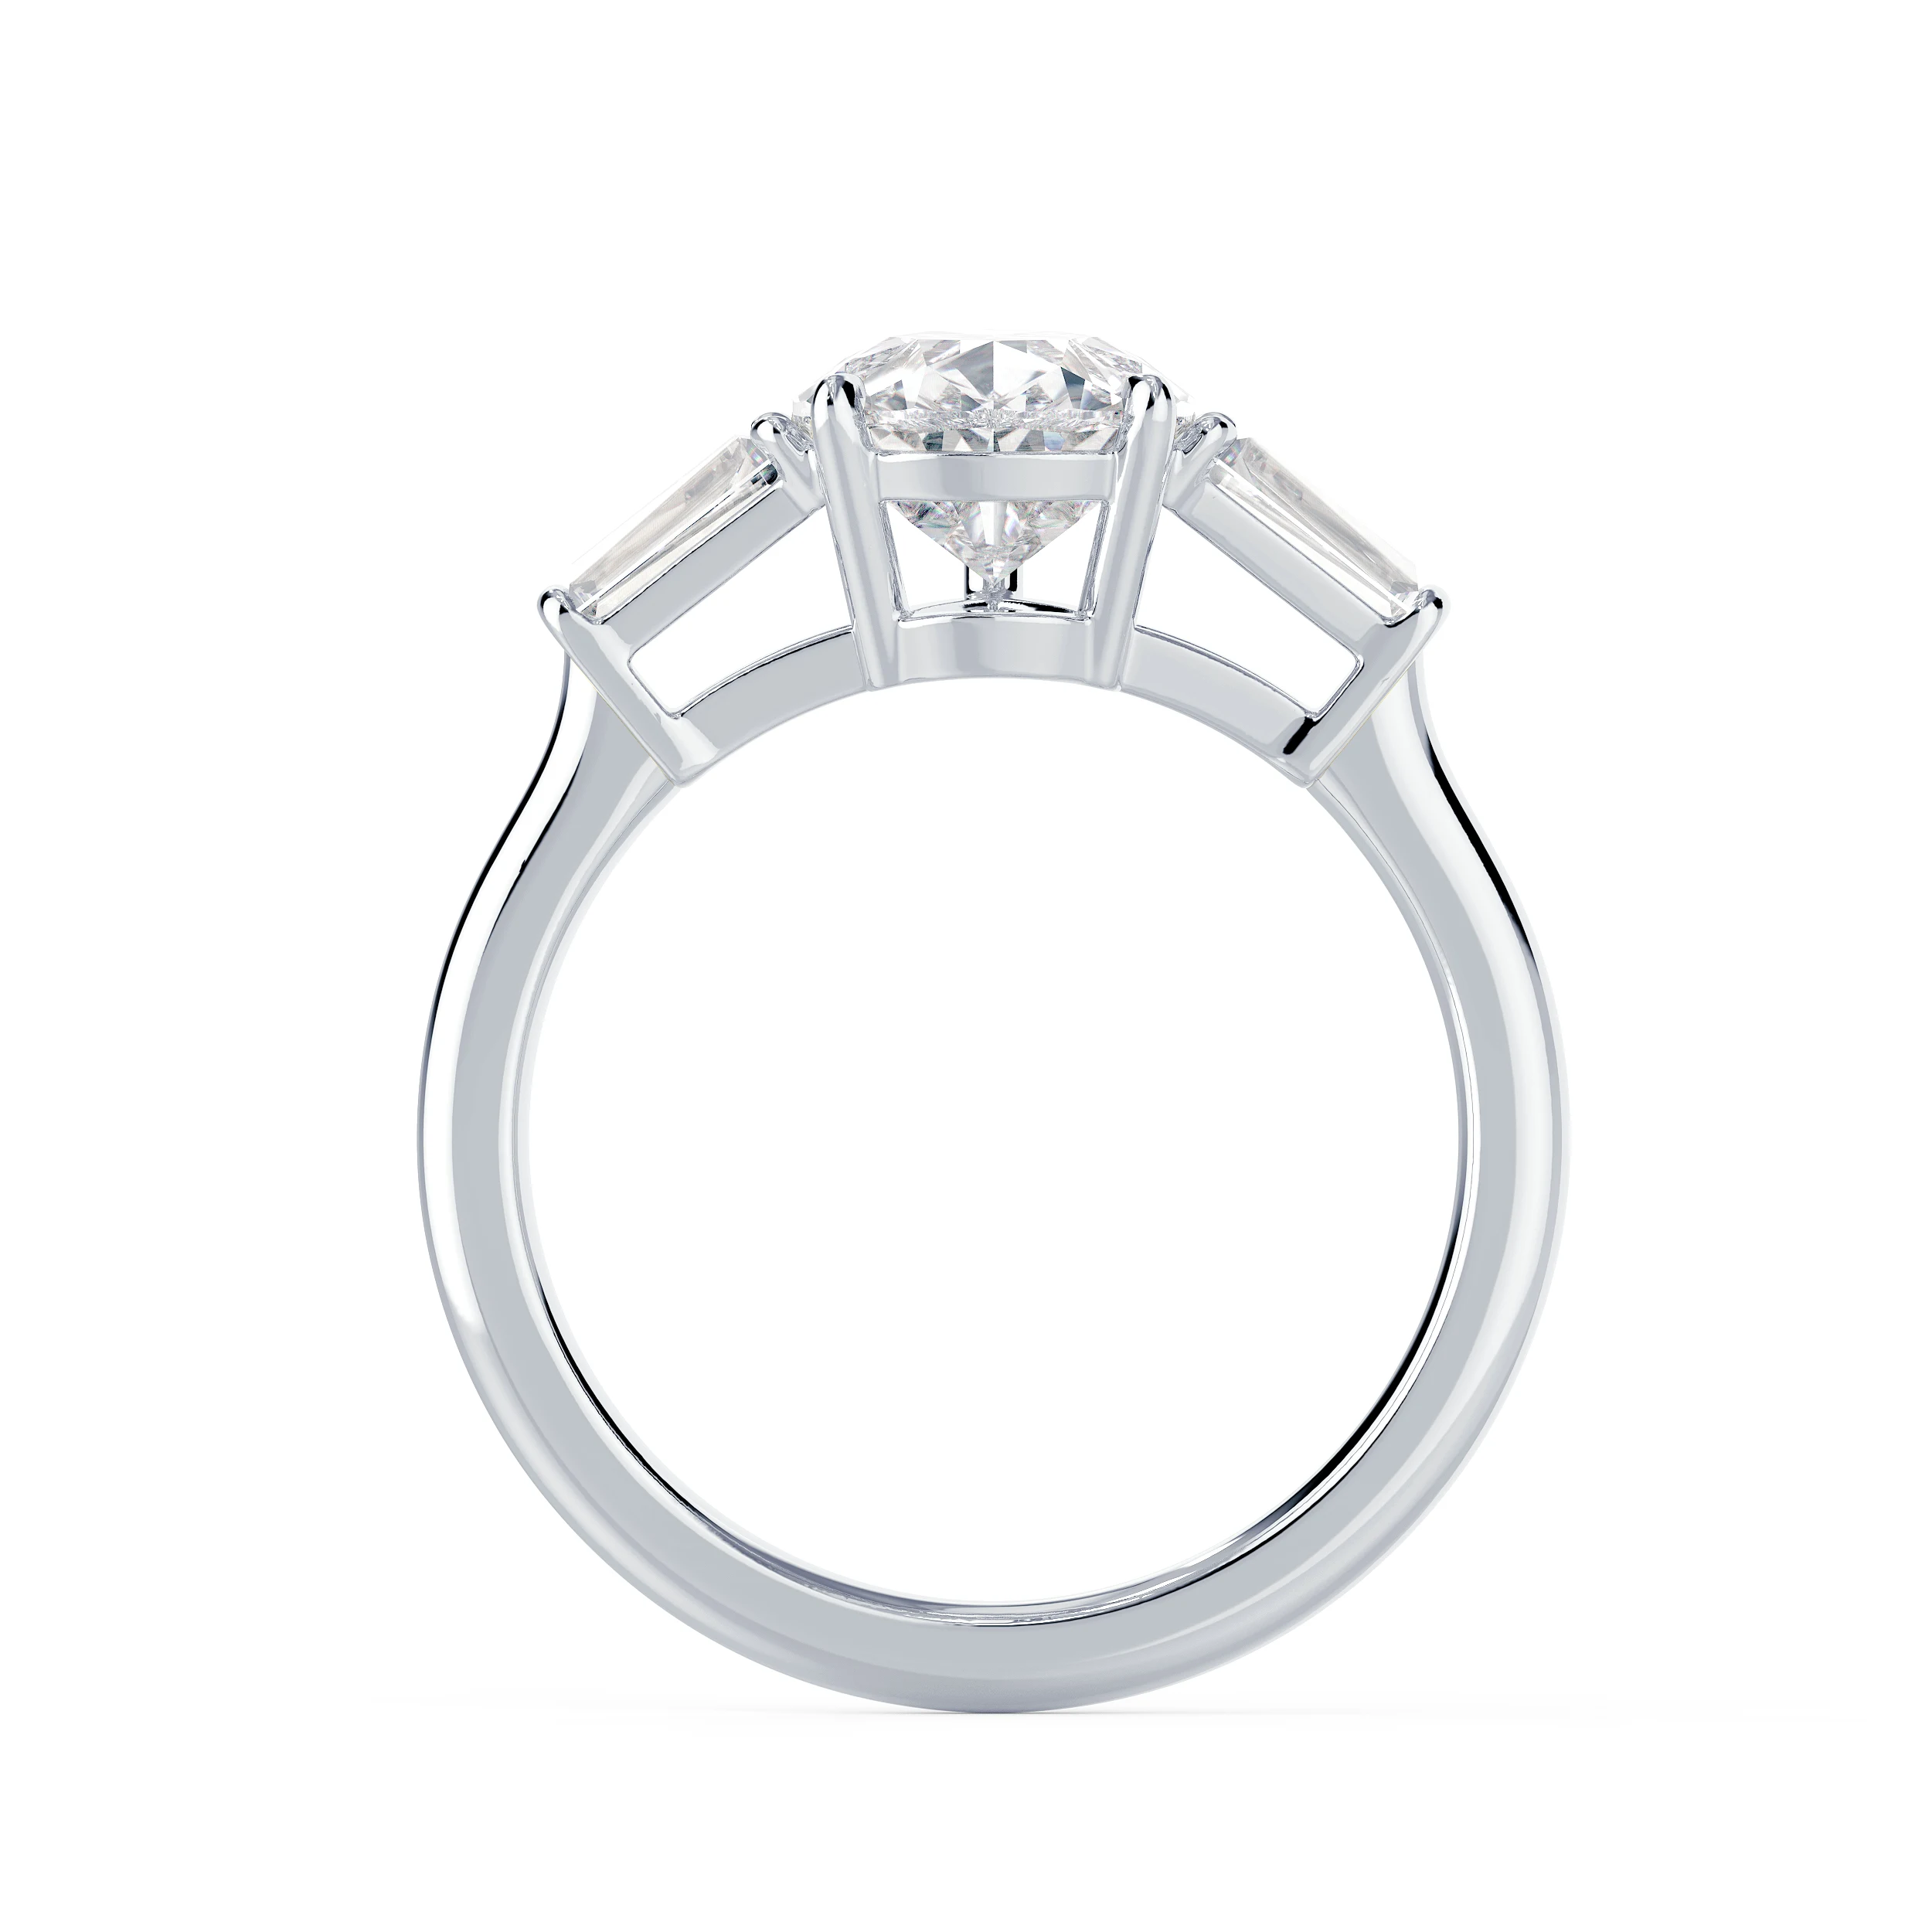 White Gold Pear and Baguette Setting featuring Synthetic Diamonds (Profile View)